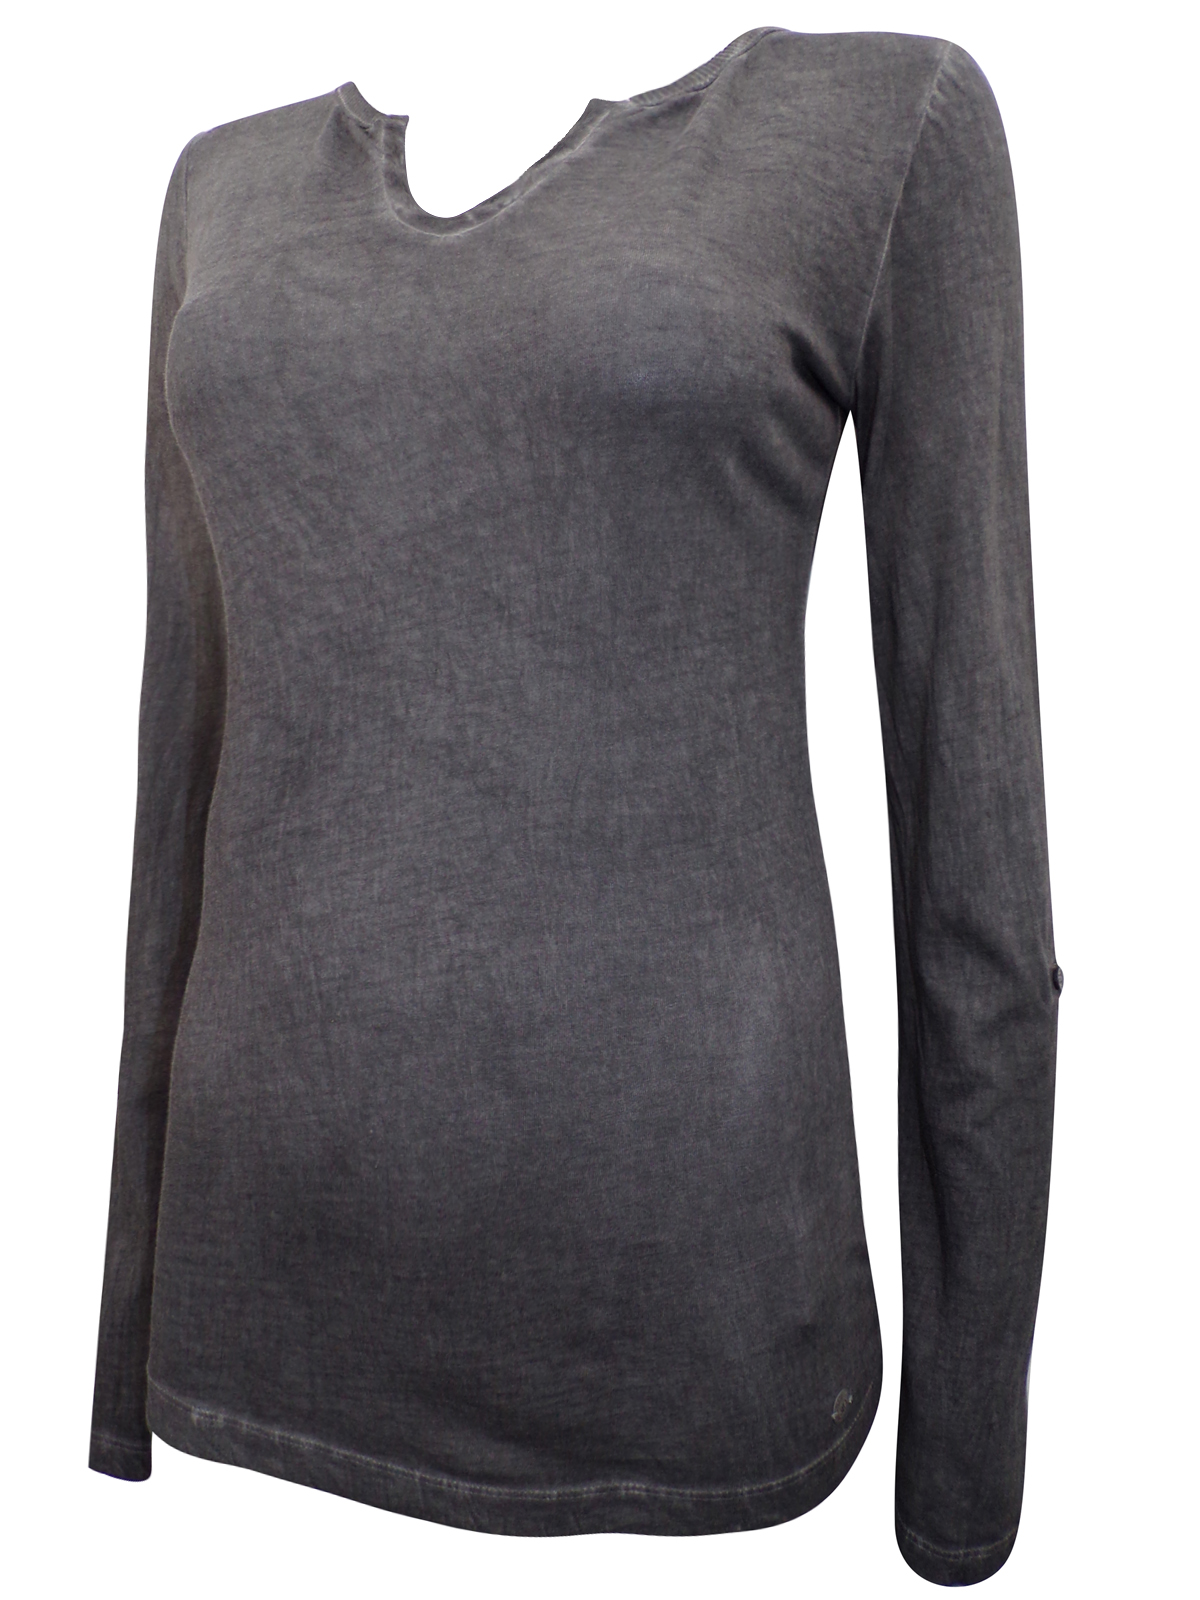 S.Oliver - Triangle - - S.Oliver MINT Pure Cotton Long Sleeve Top ...